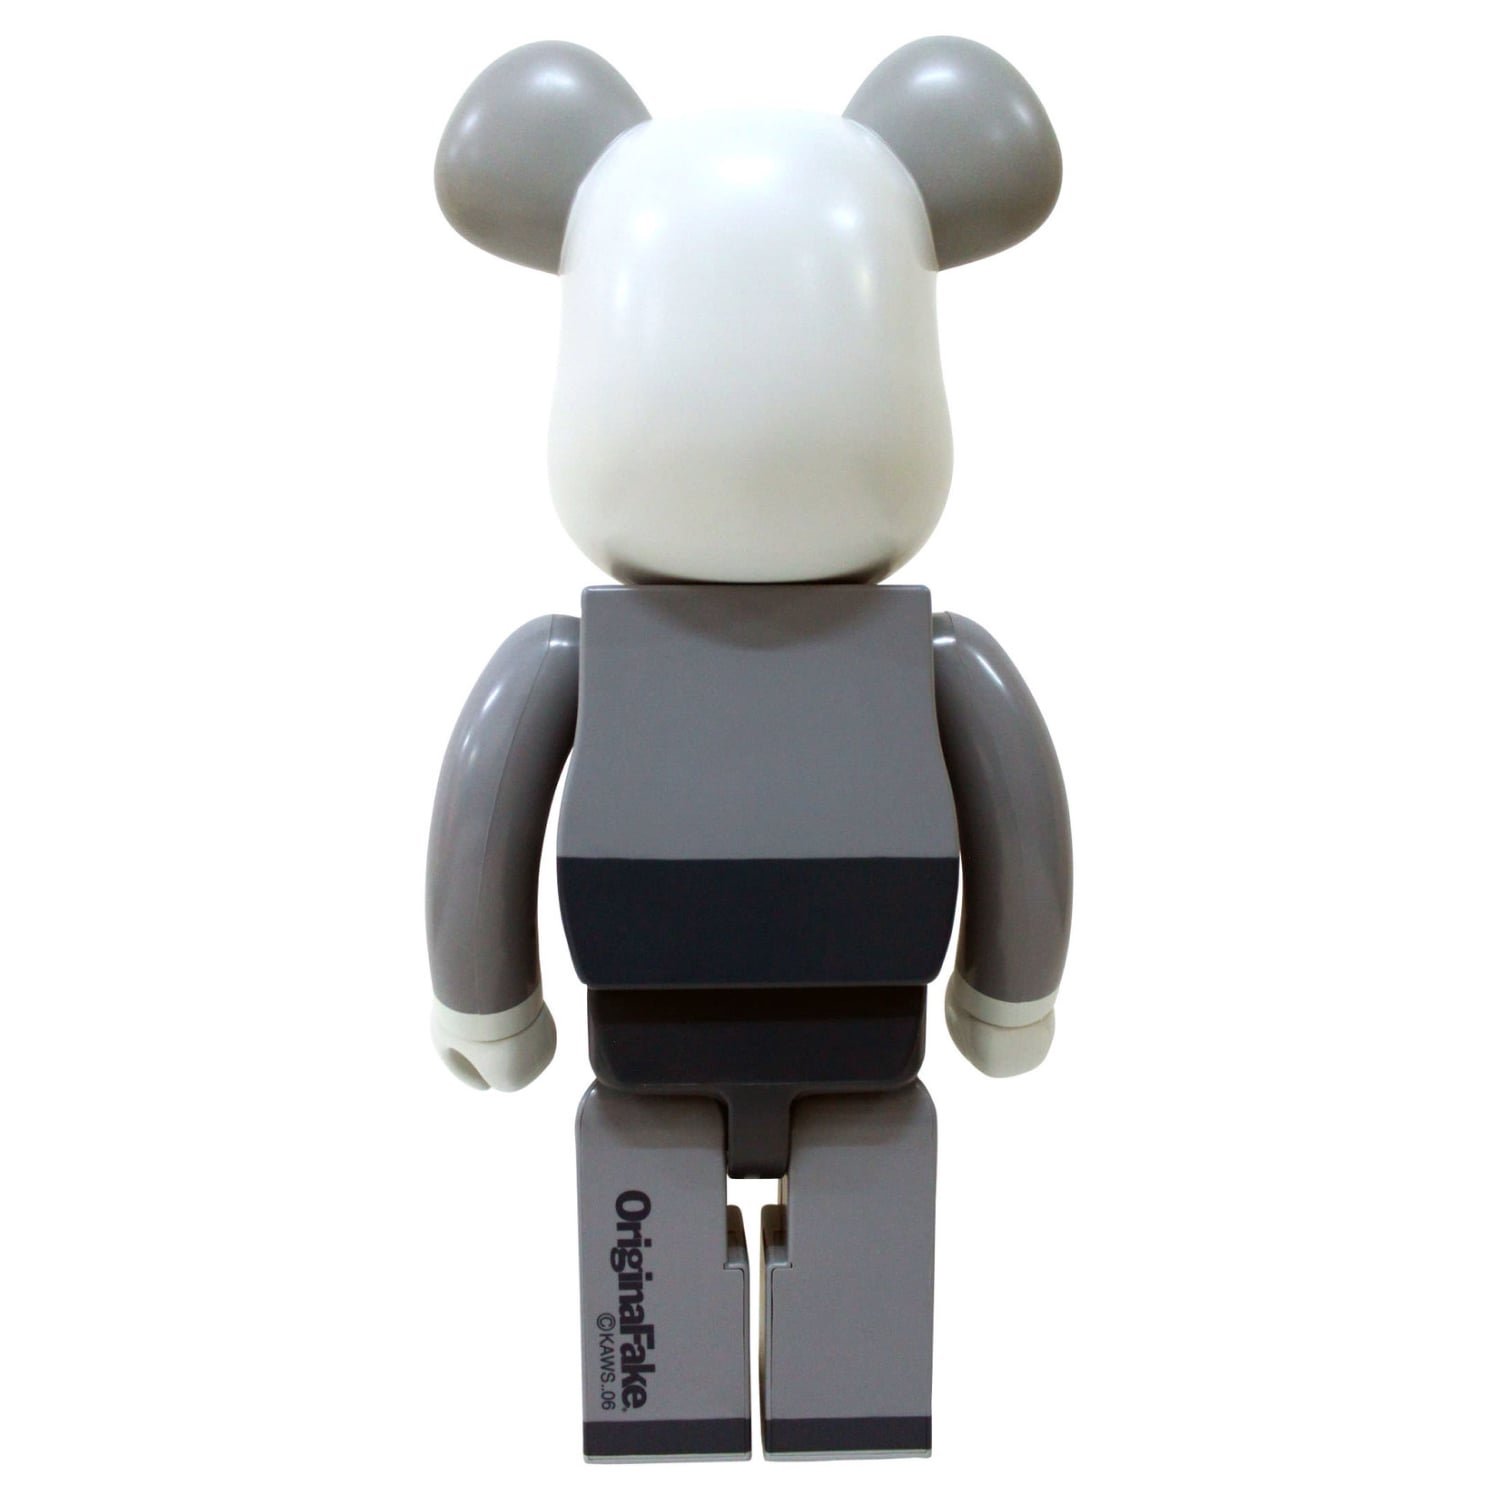 Kaws Companion” from Be@rbrick - Dope! Gallery